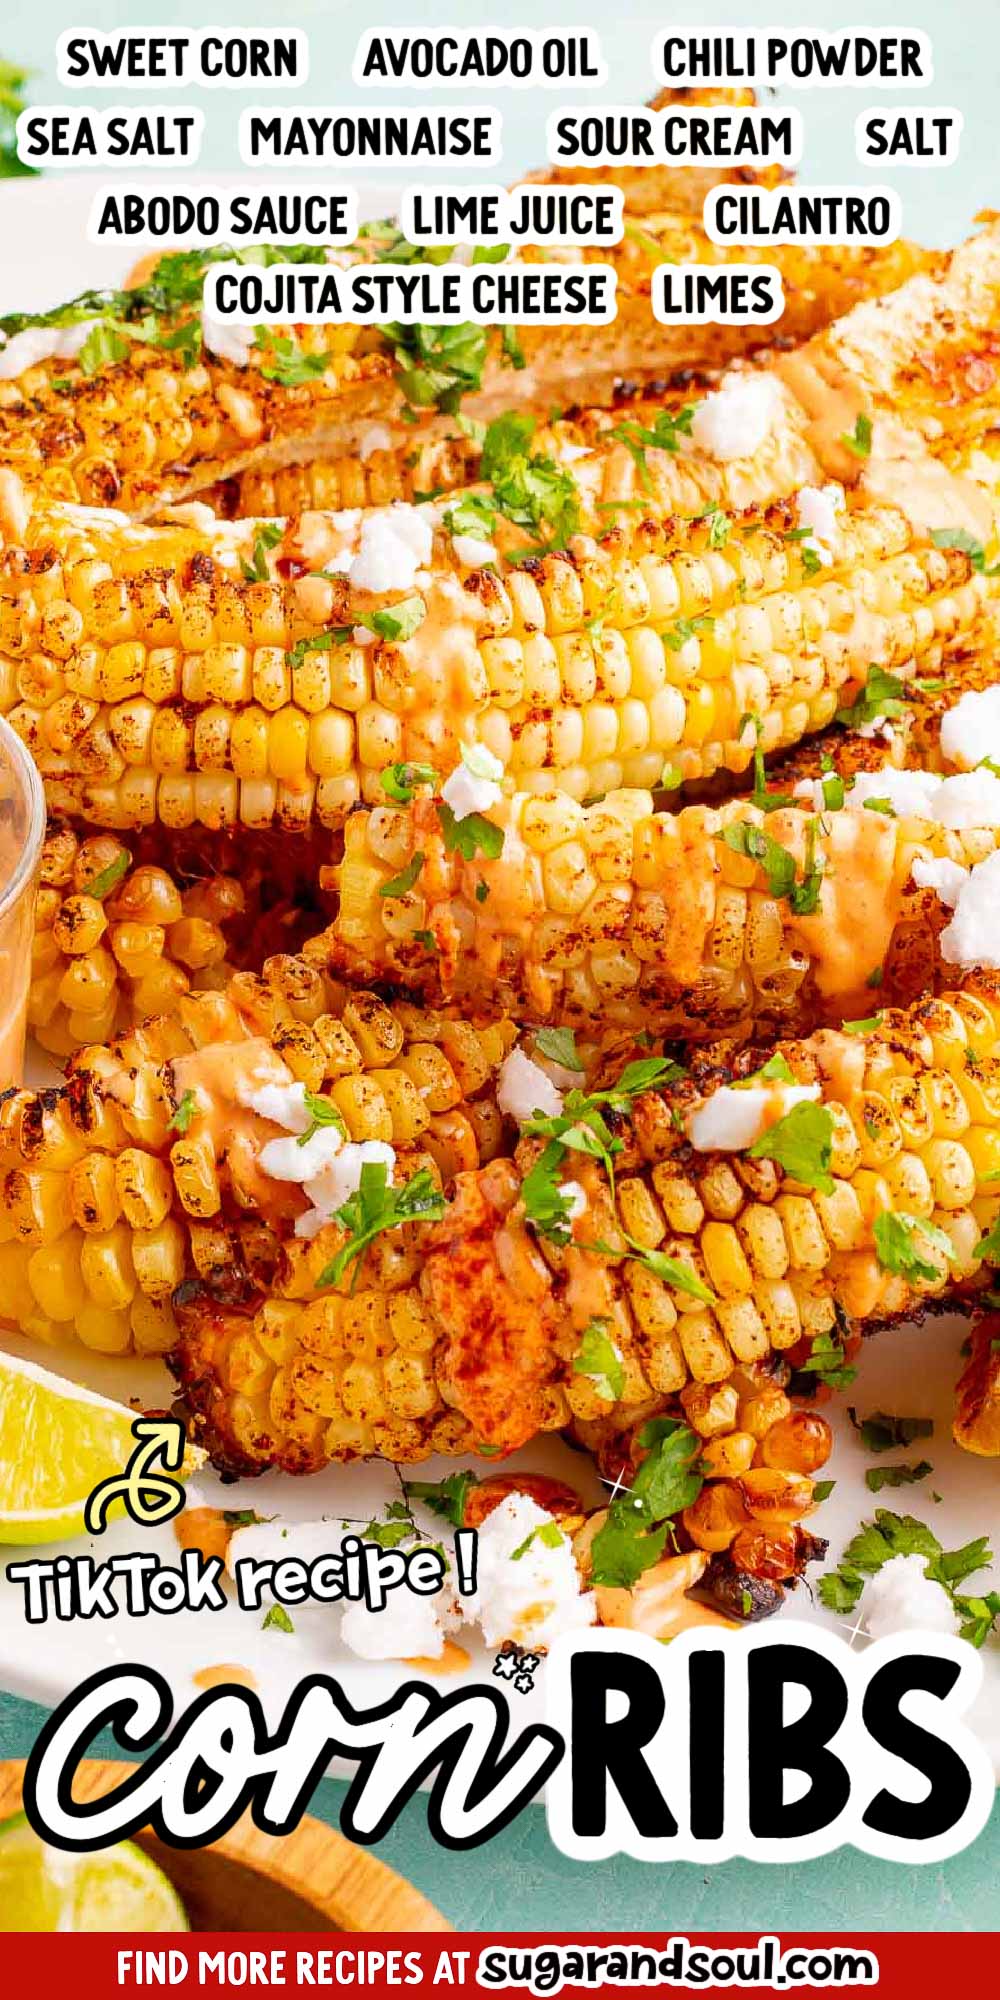 Corn Ribs slices ears of fresh sweet corn into strips and seasons them before they get charred up to perfectly sweet and slightly chewy corn! Prep this TikTok side dish in just 15 minutes! via @sugarandsoulco